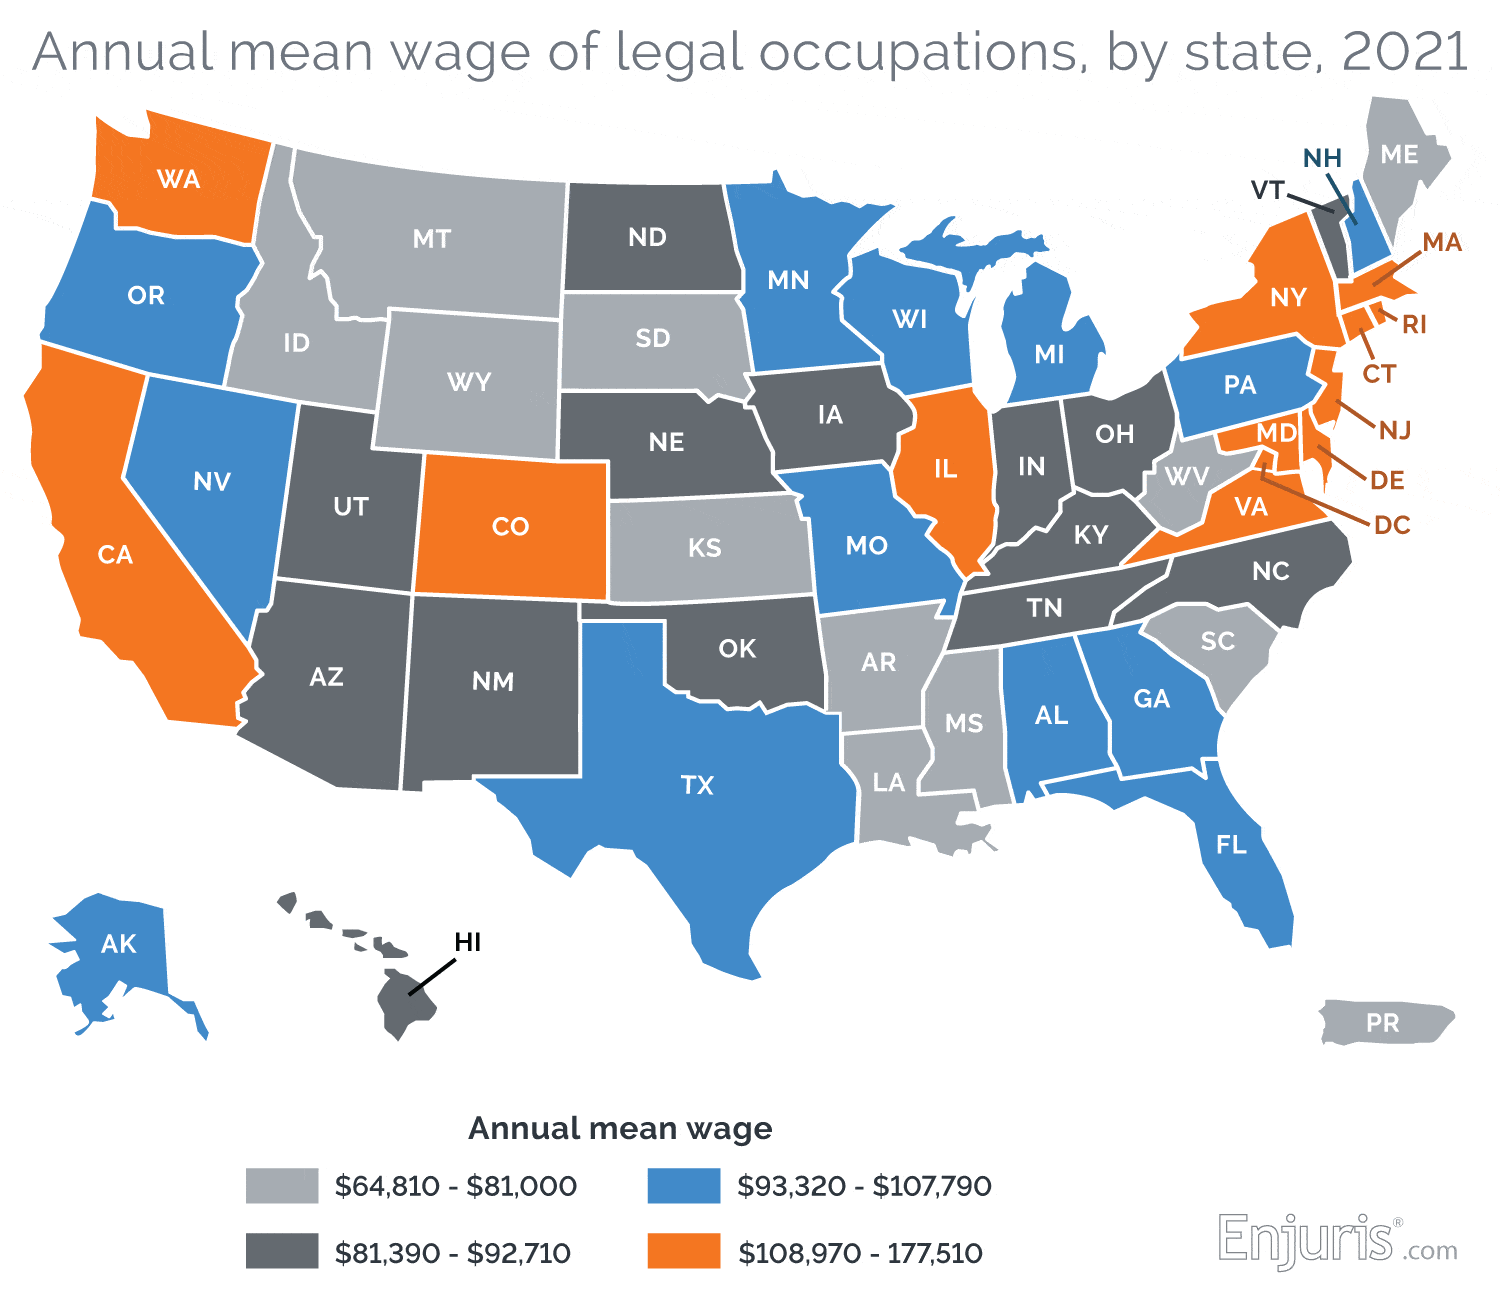 Annual mean wage of legal occupations, by state, 2021